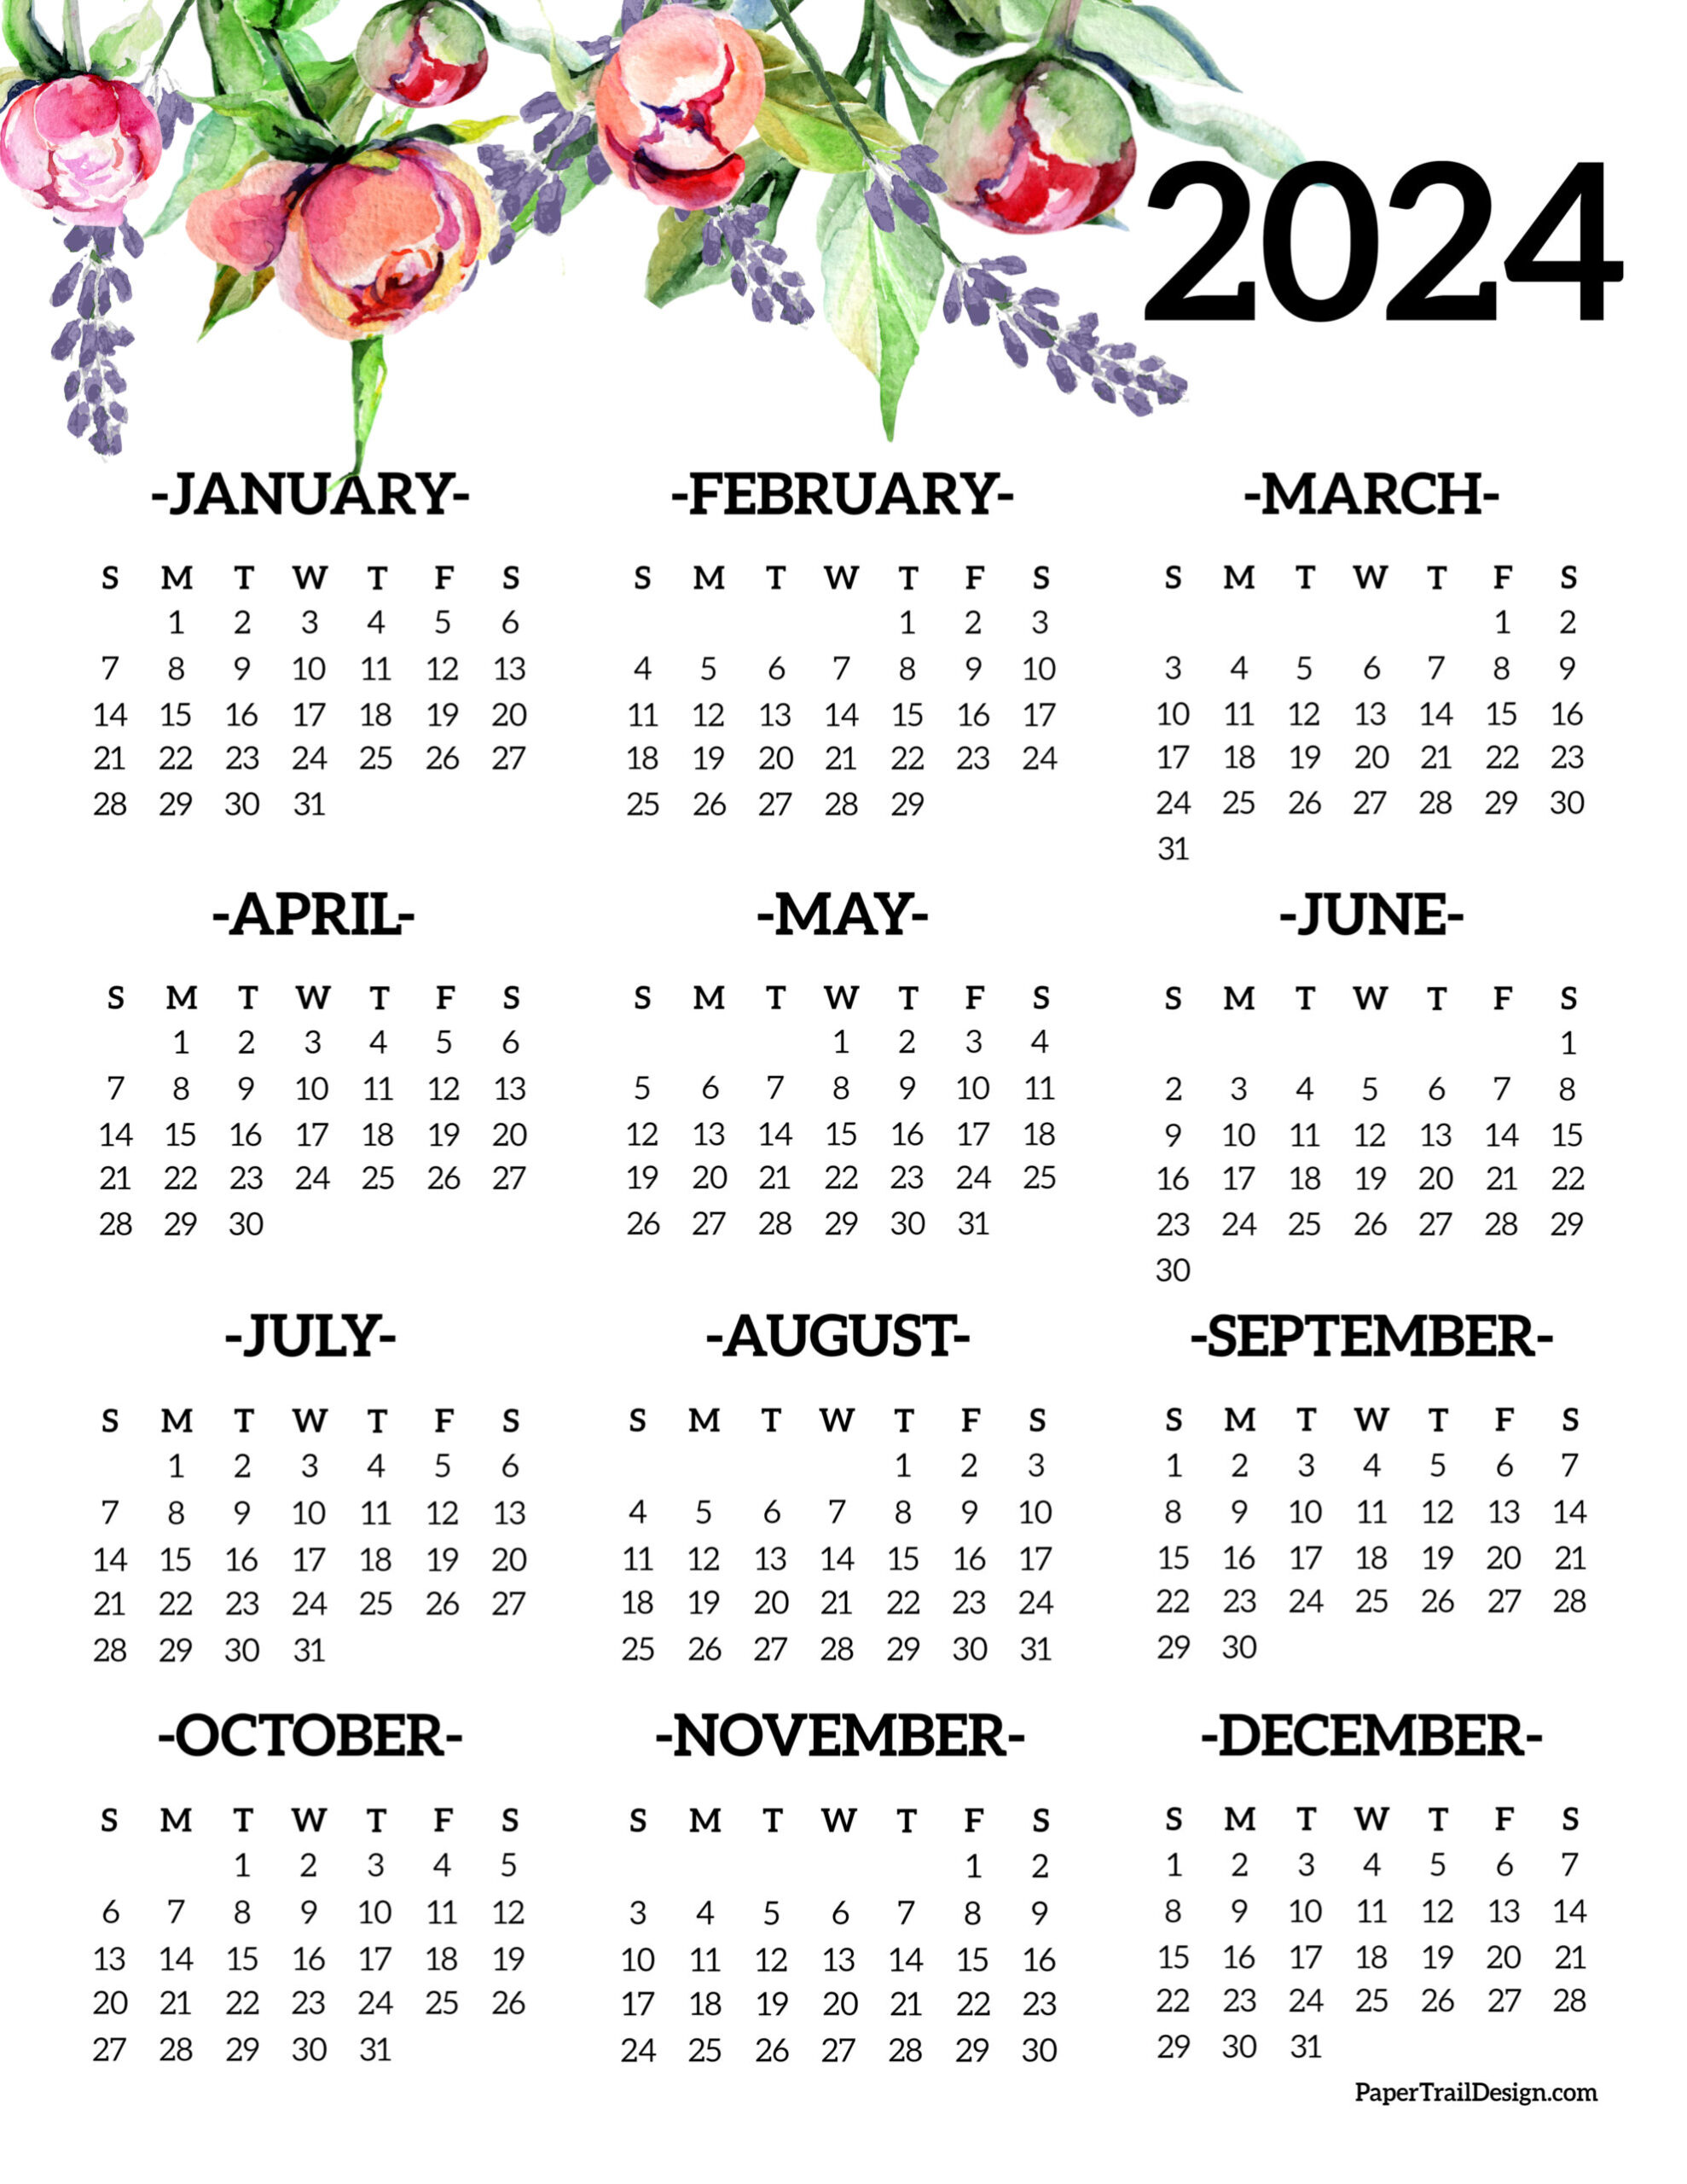 Calendar 2024 Printable One Page - Paper Trail Design for 2024 Calendar Printable One Page Free